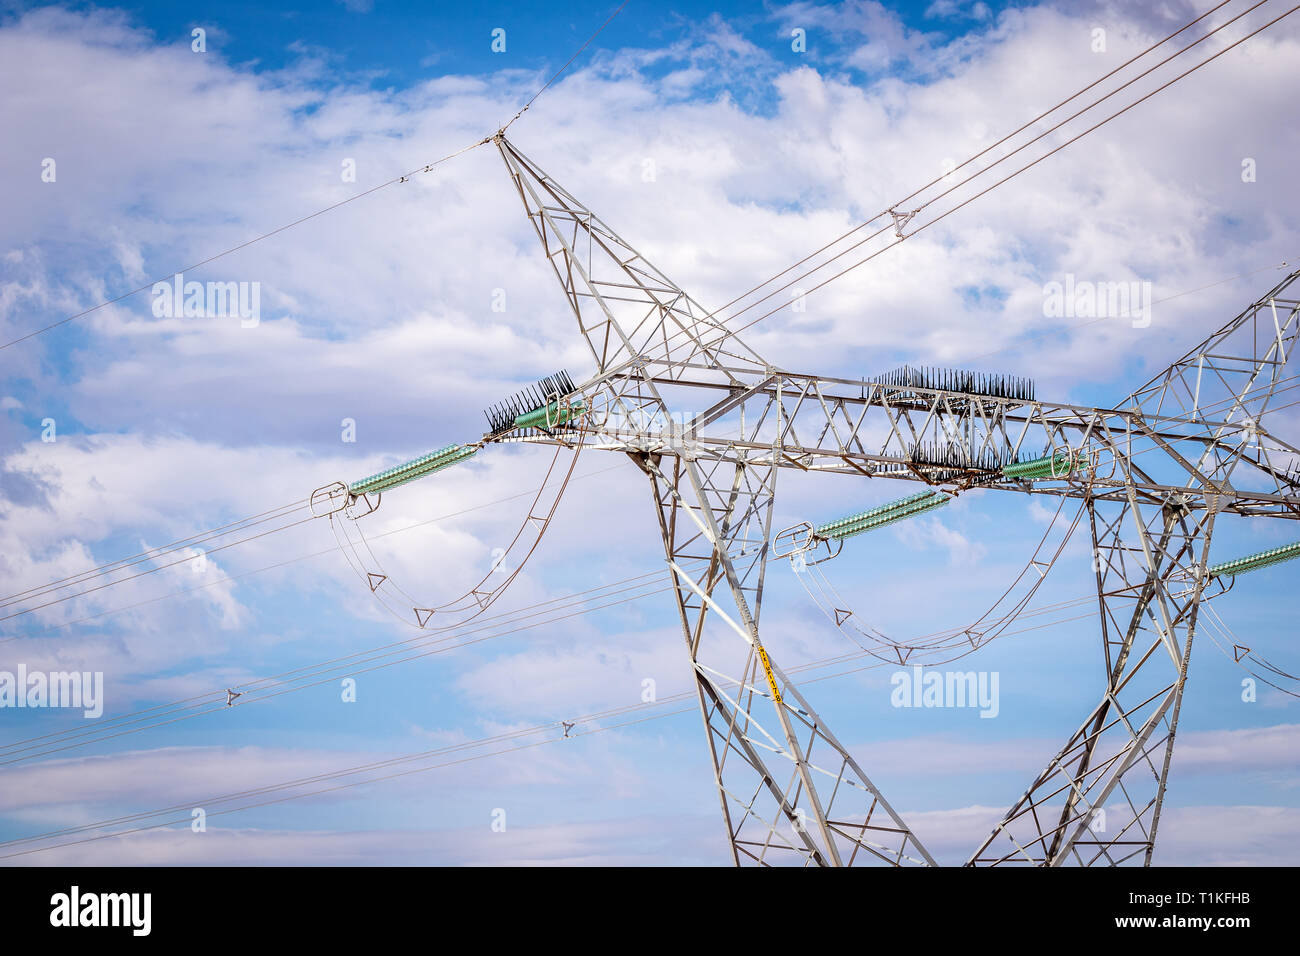 Overhead high voltage power lines Stock Photo